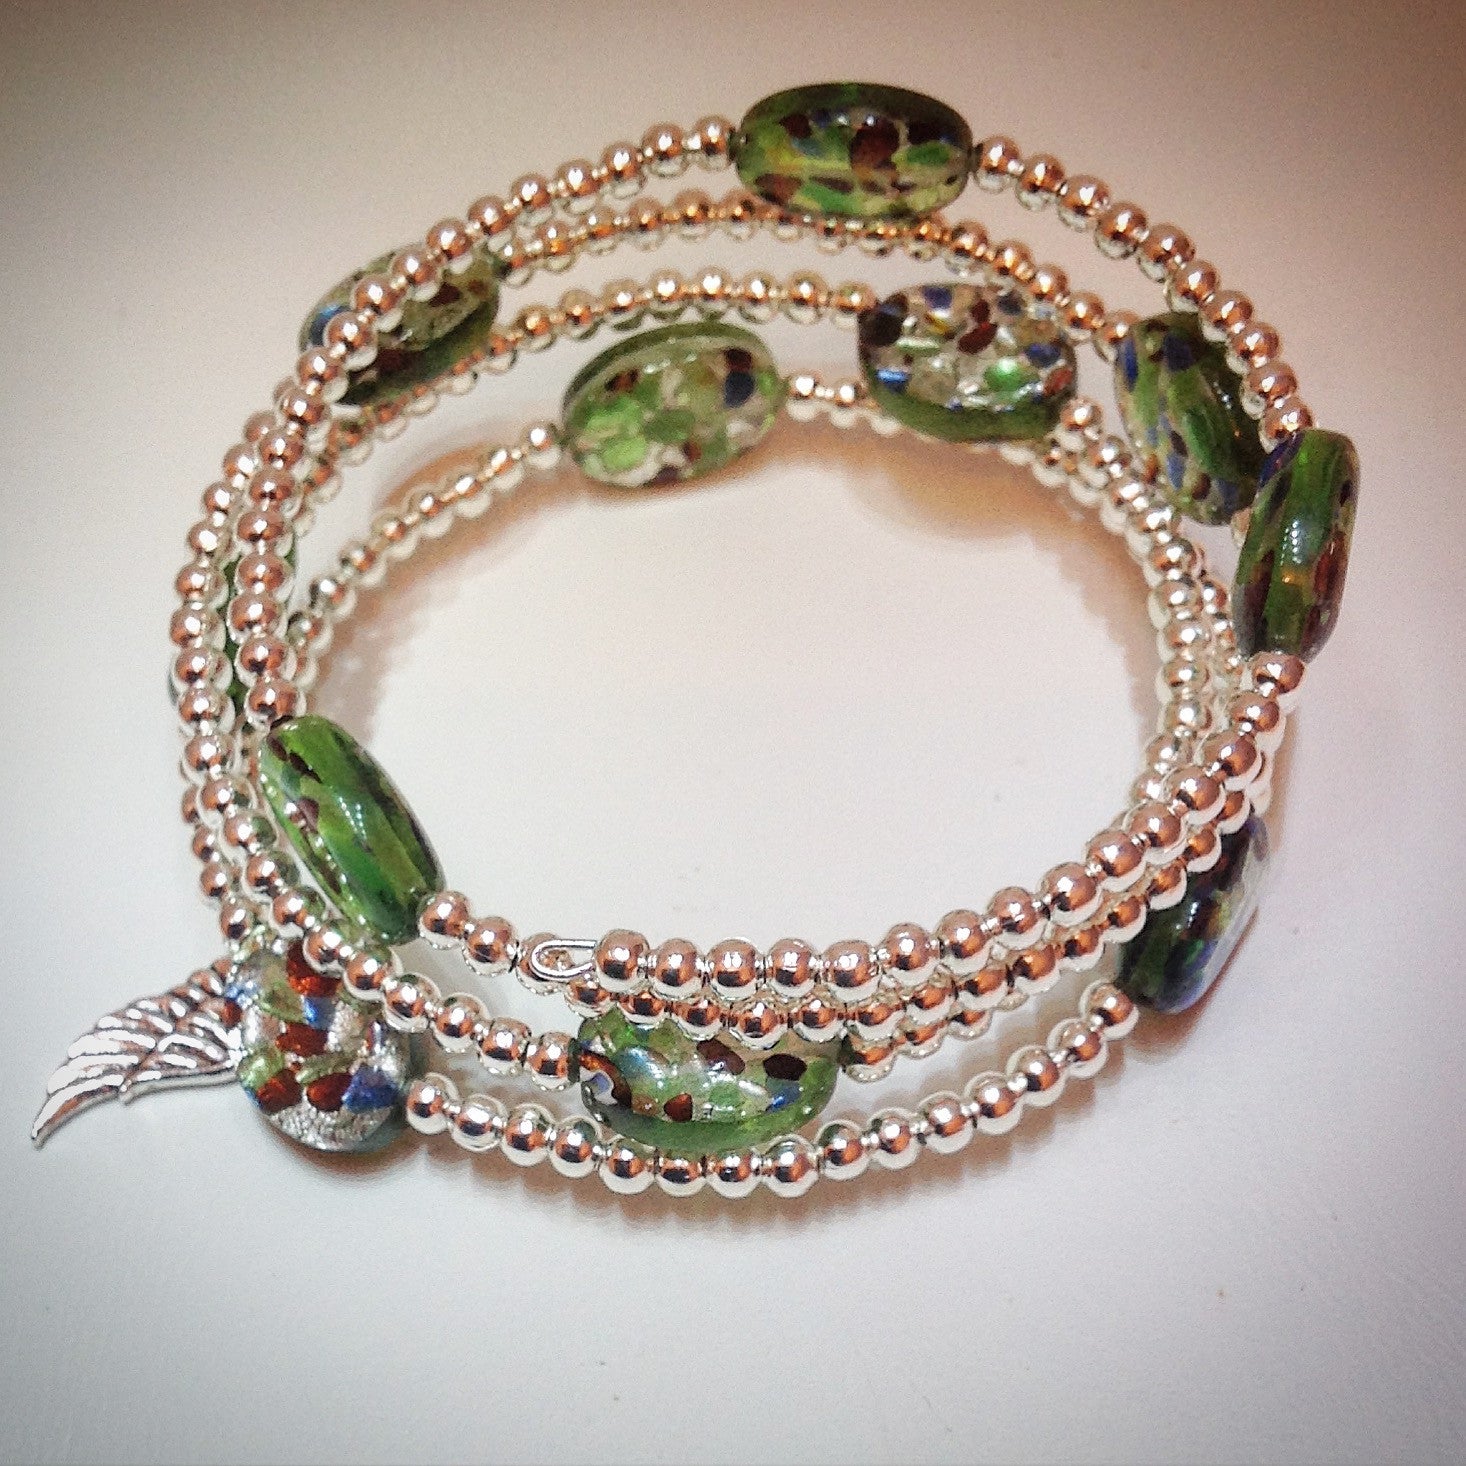 Beaded memory wire bracelet - Oval Venetian glass and silver beads with ...